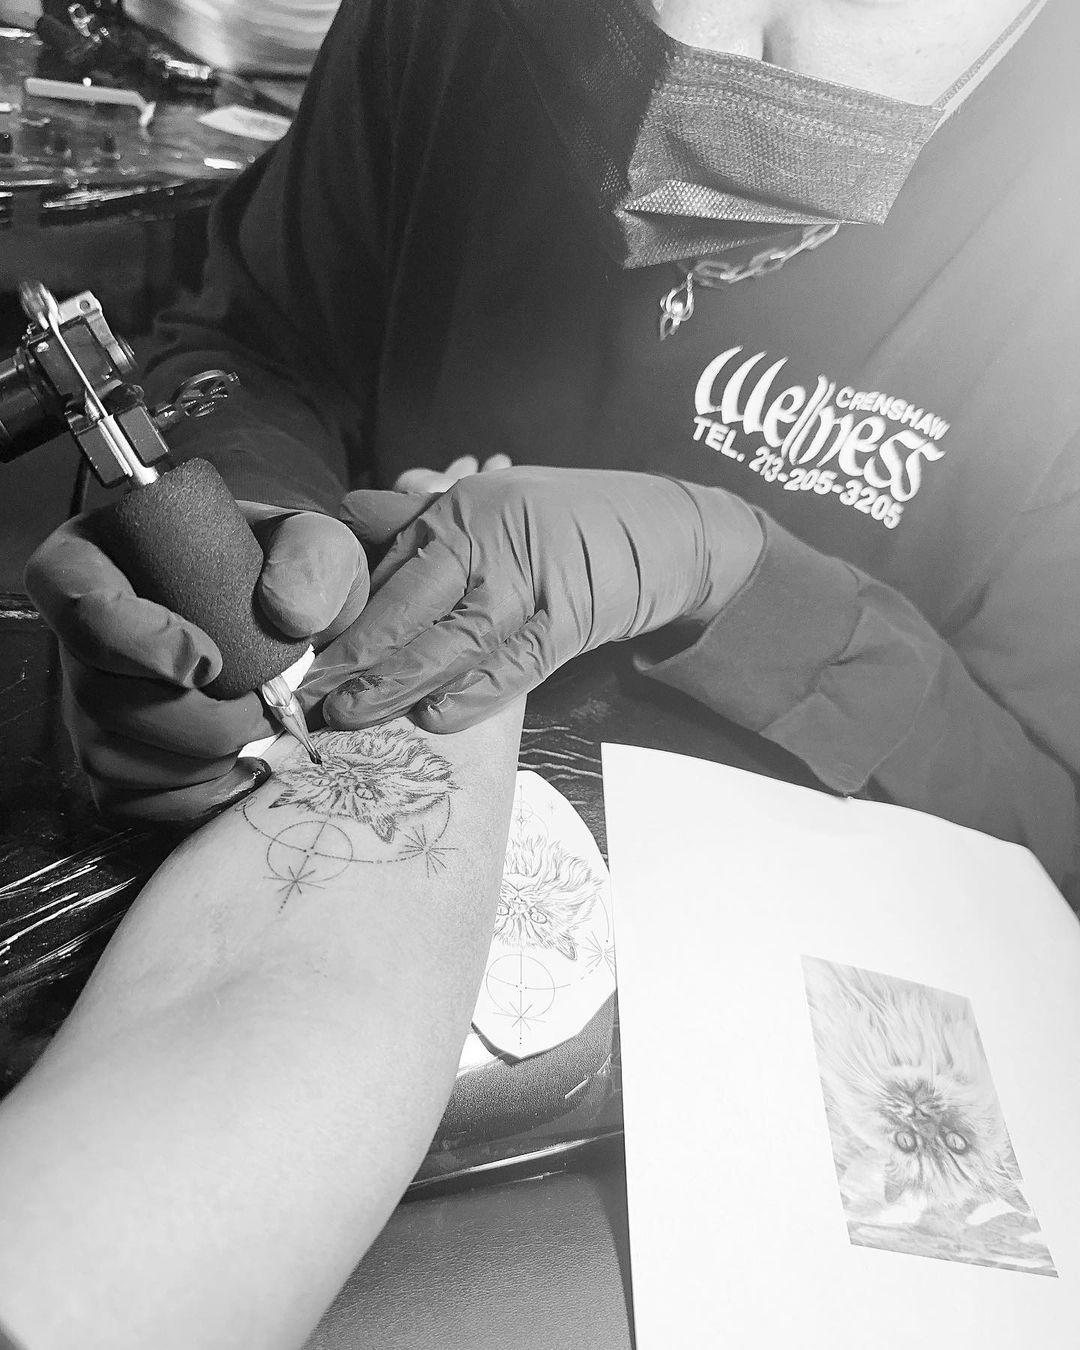 Kate Beckinsale got a tattoo of her late pet, Clive the cat